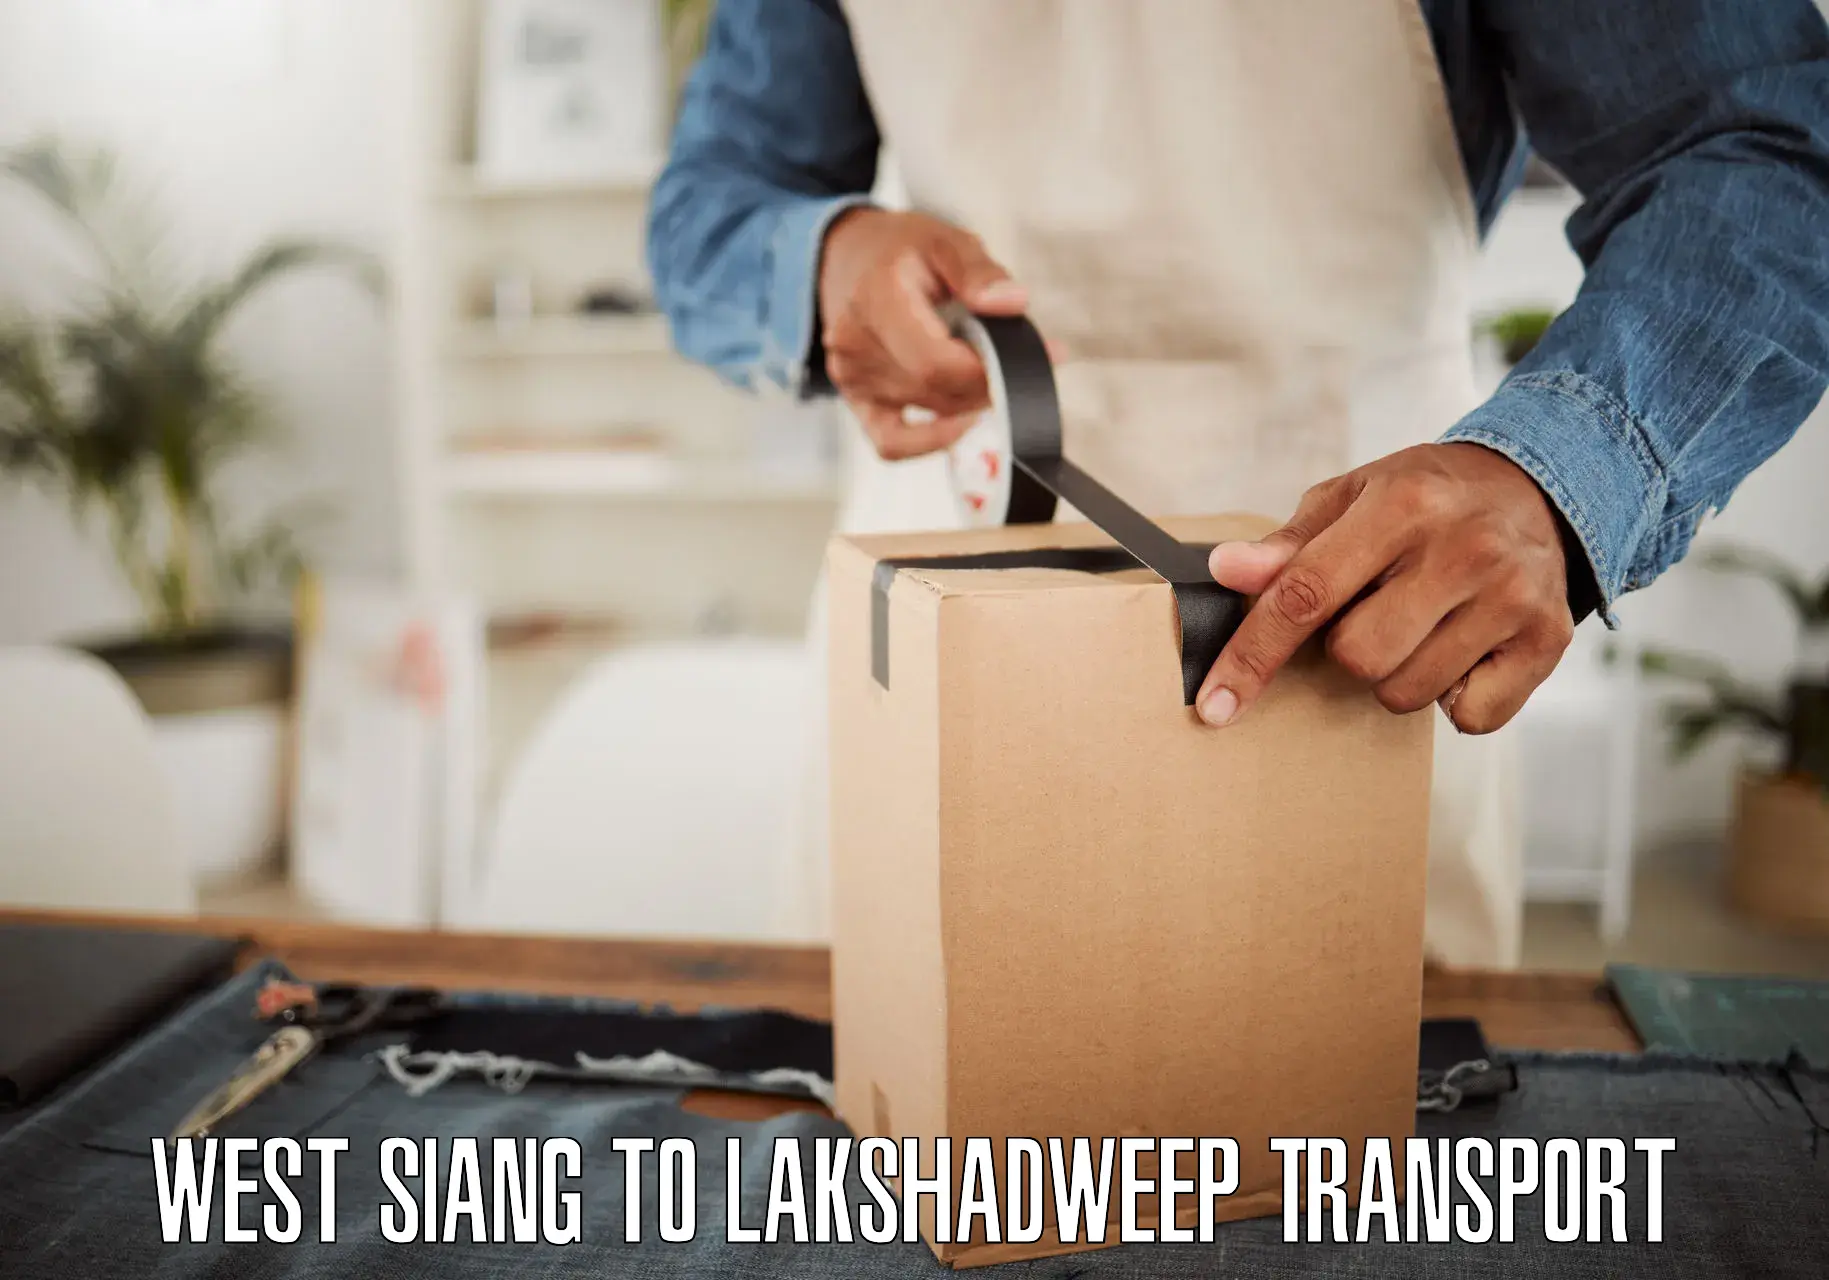 Express transport services in West Siang to Lakshadweep